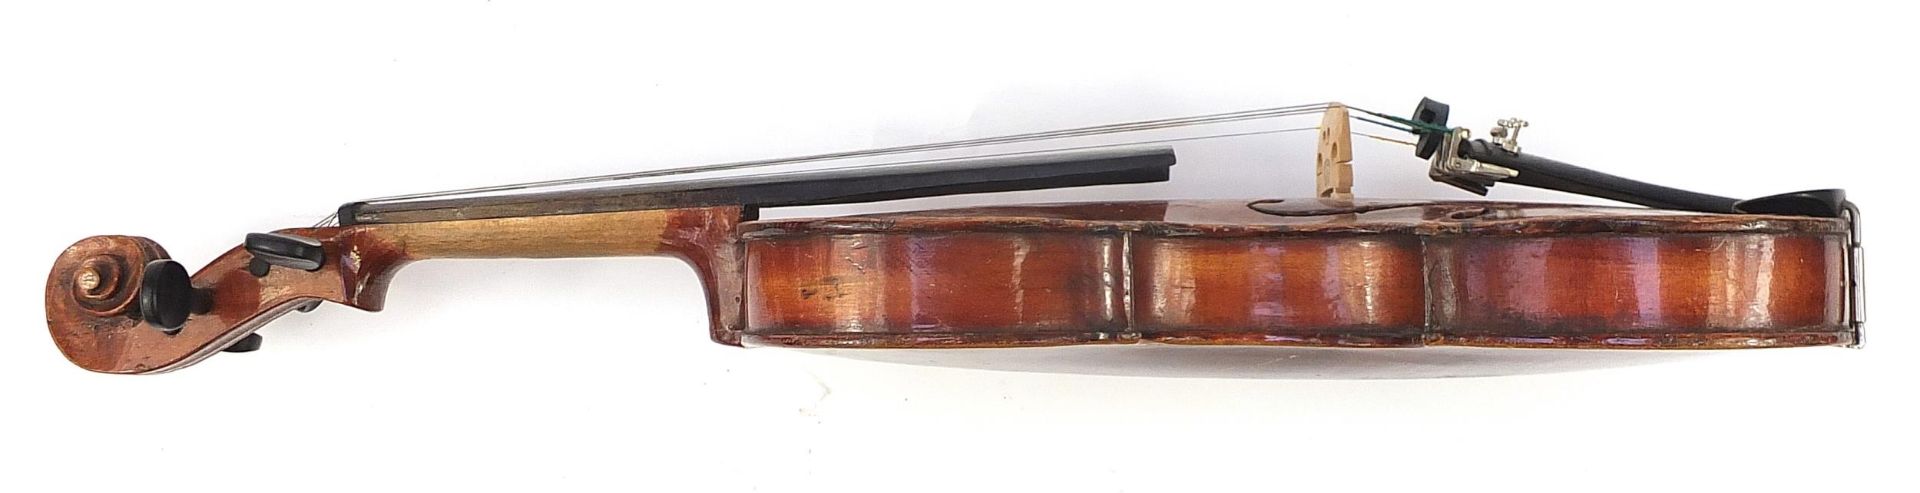 Old wooden violin with two bows and protective case, the violin back 14 inches in length, one violin - Image 7 of 11